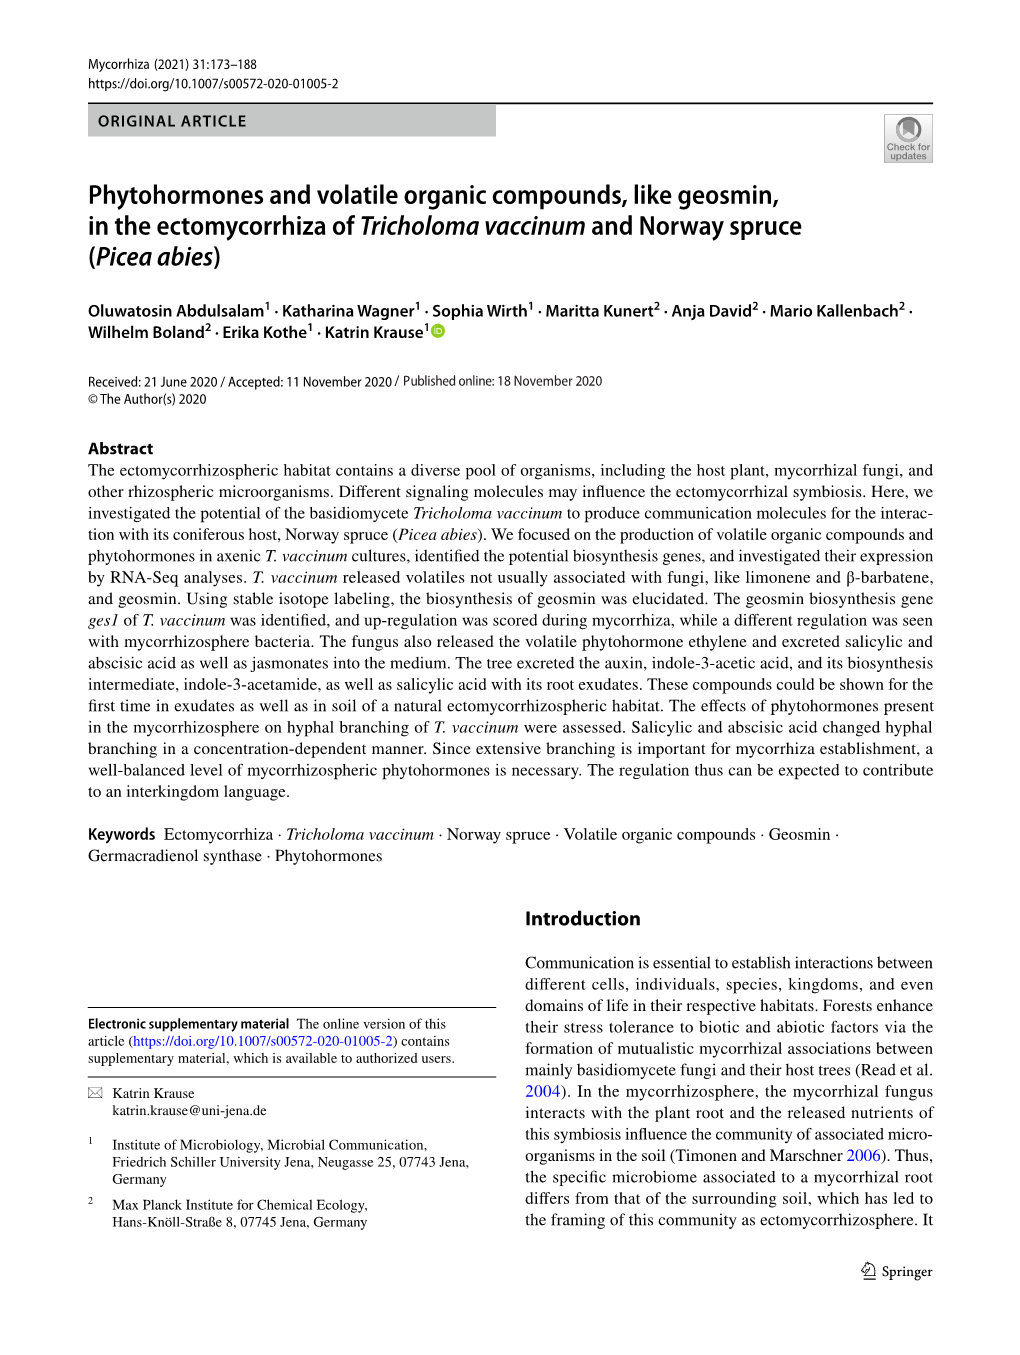 Phytohormones and Volatile Organic Compounds, Like Geosmin, in the Ectomycorrhiza of Tricholoma Vaccinum and Norway Spruce (Picea Abies)